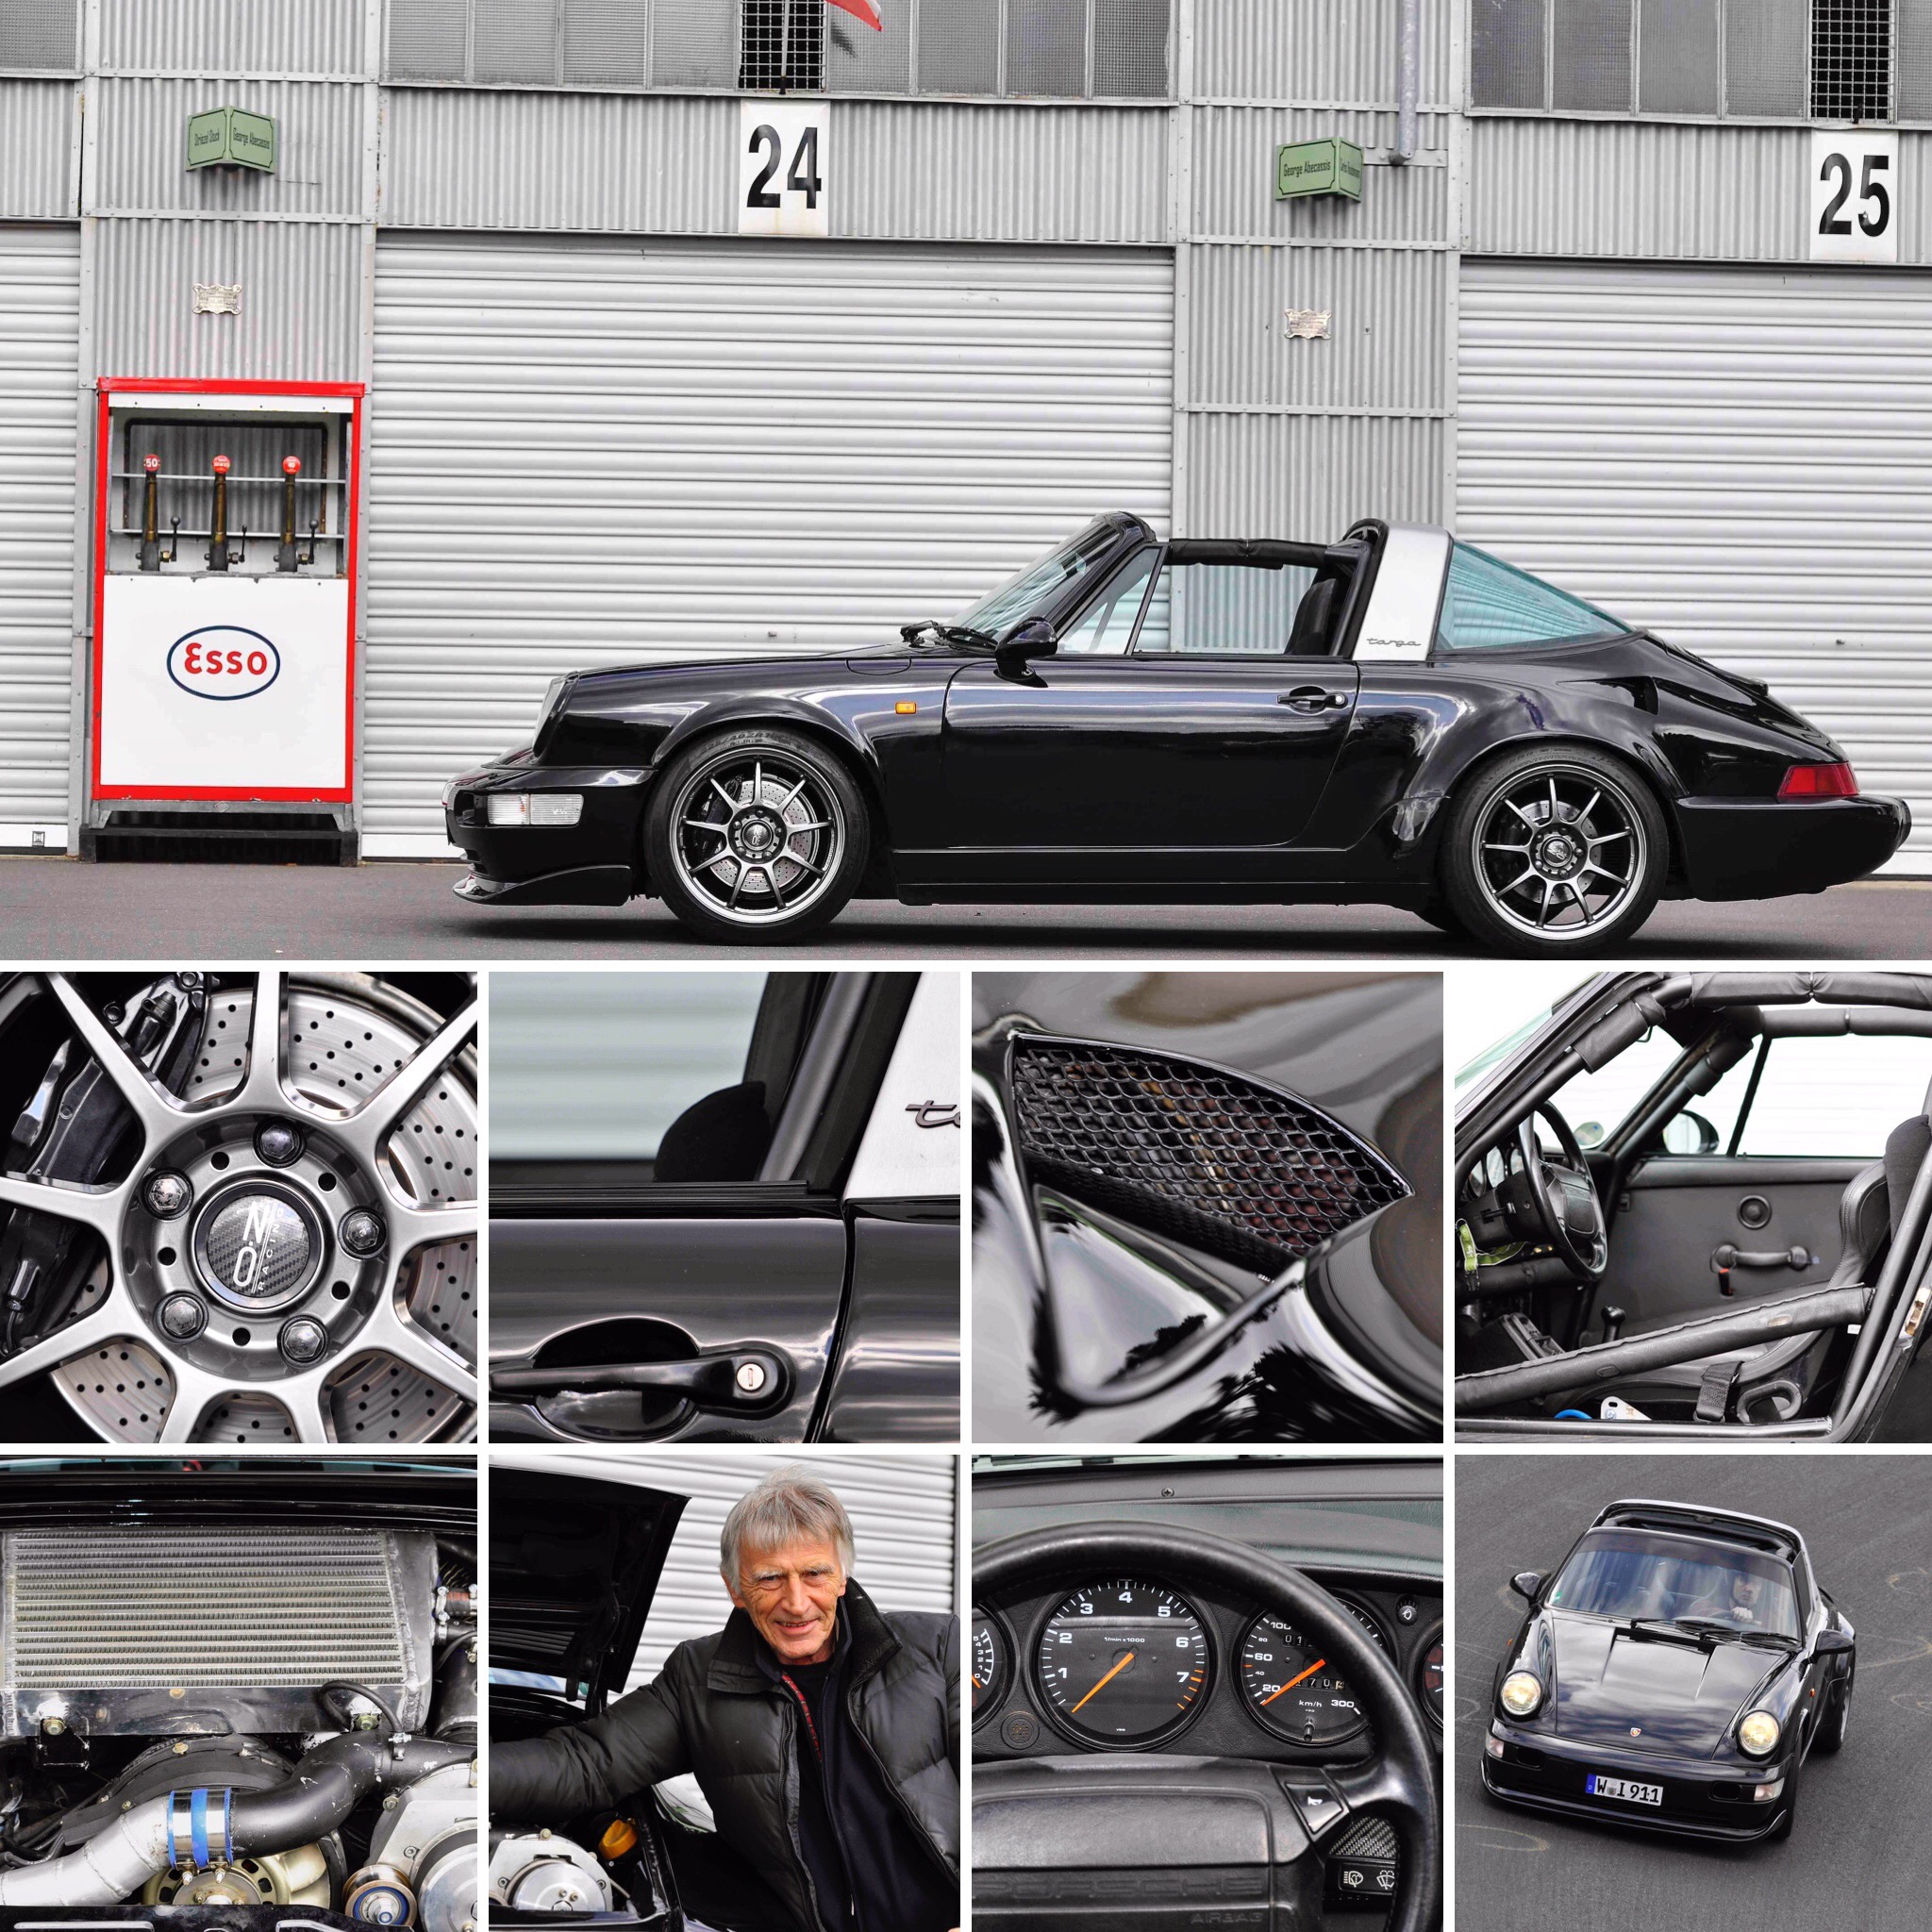 powered-by-heidl-its-targa-time-0743